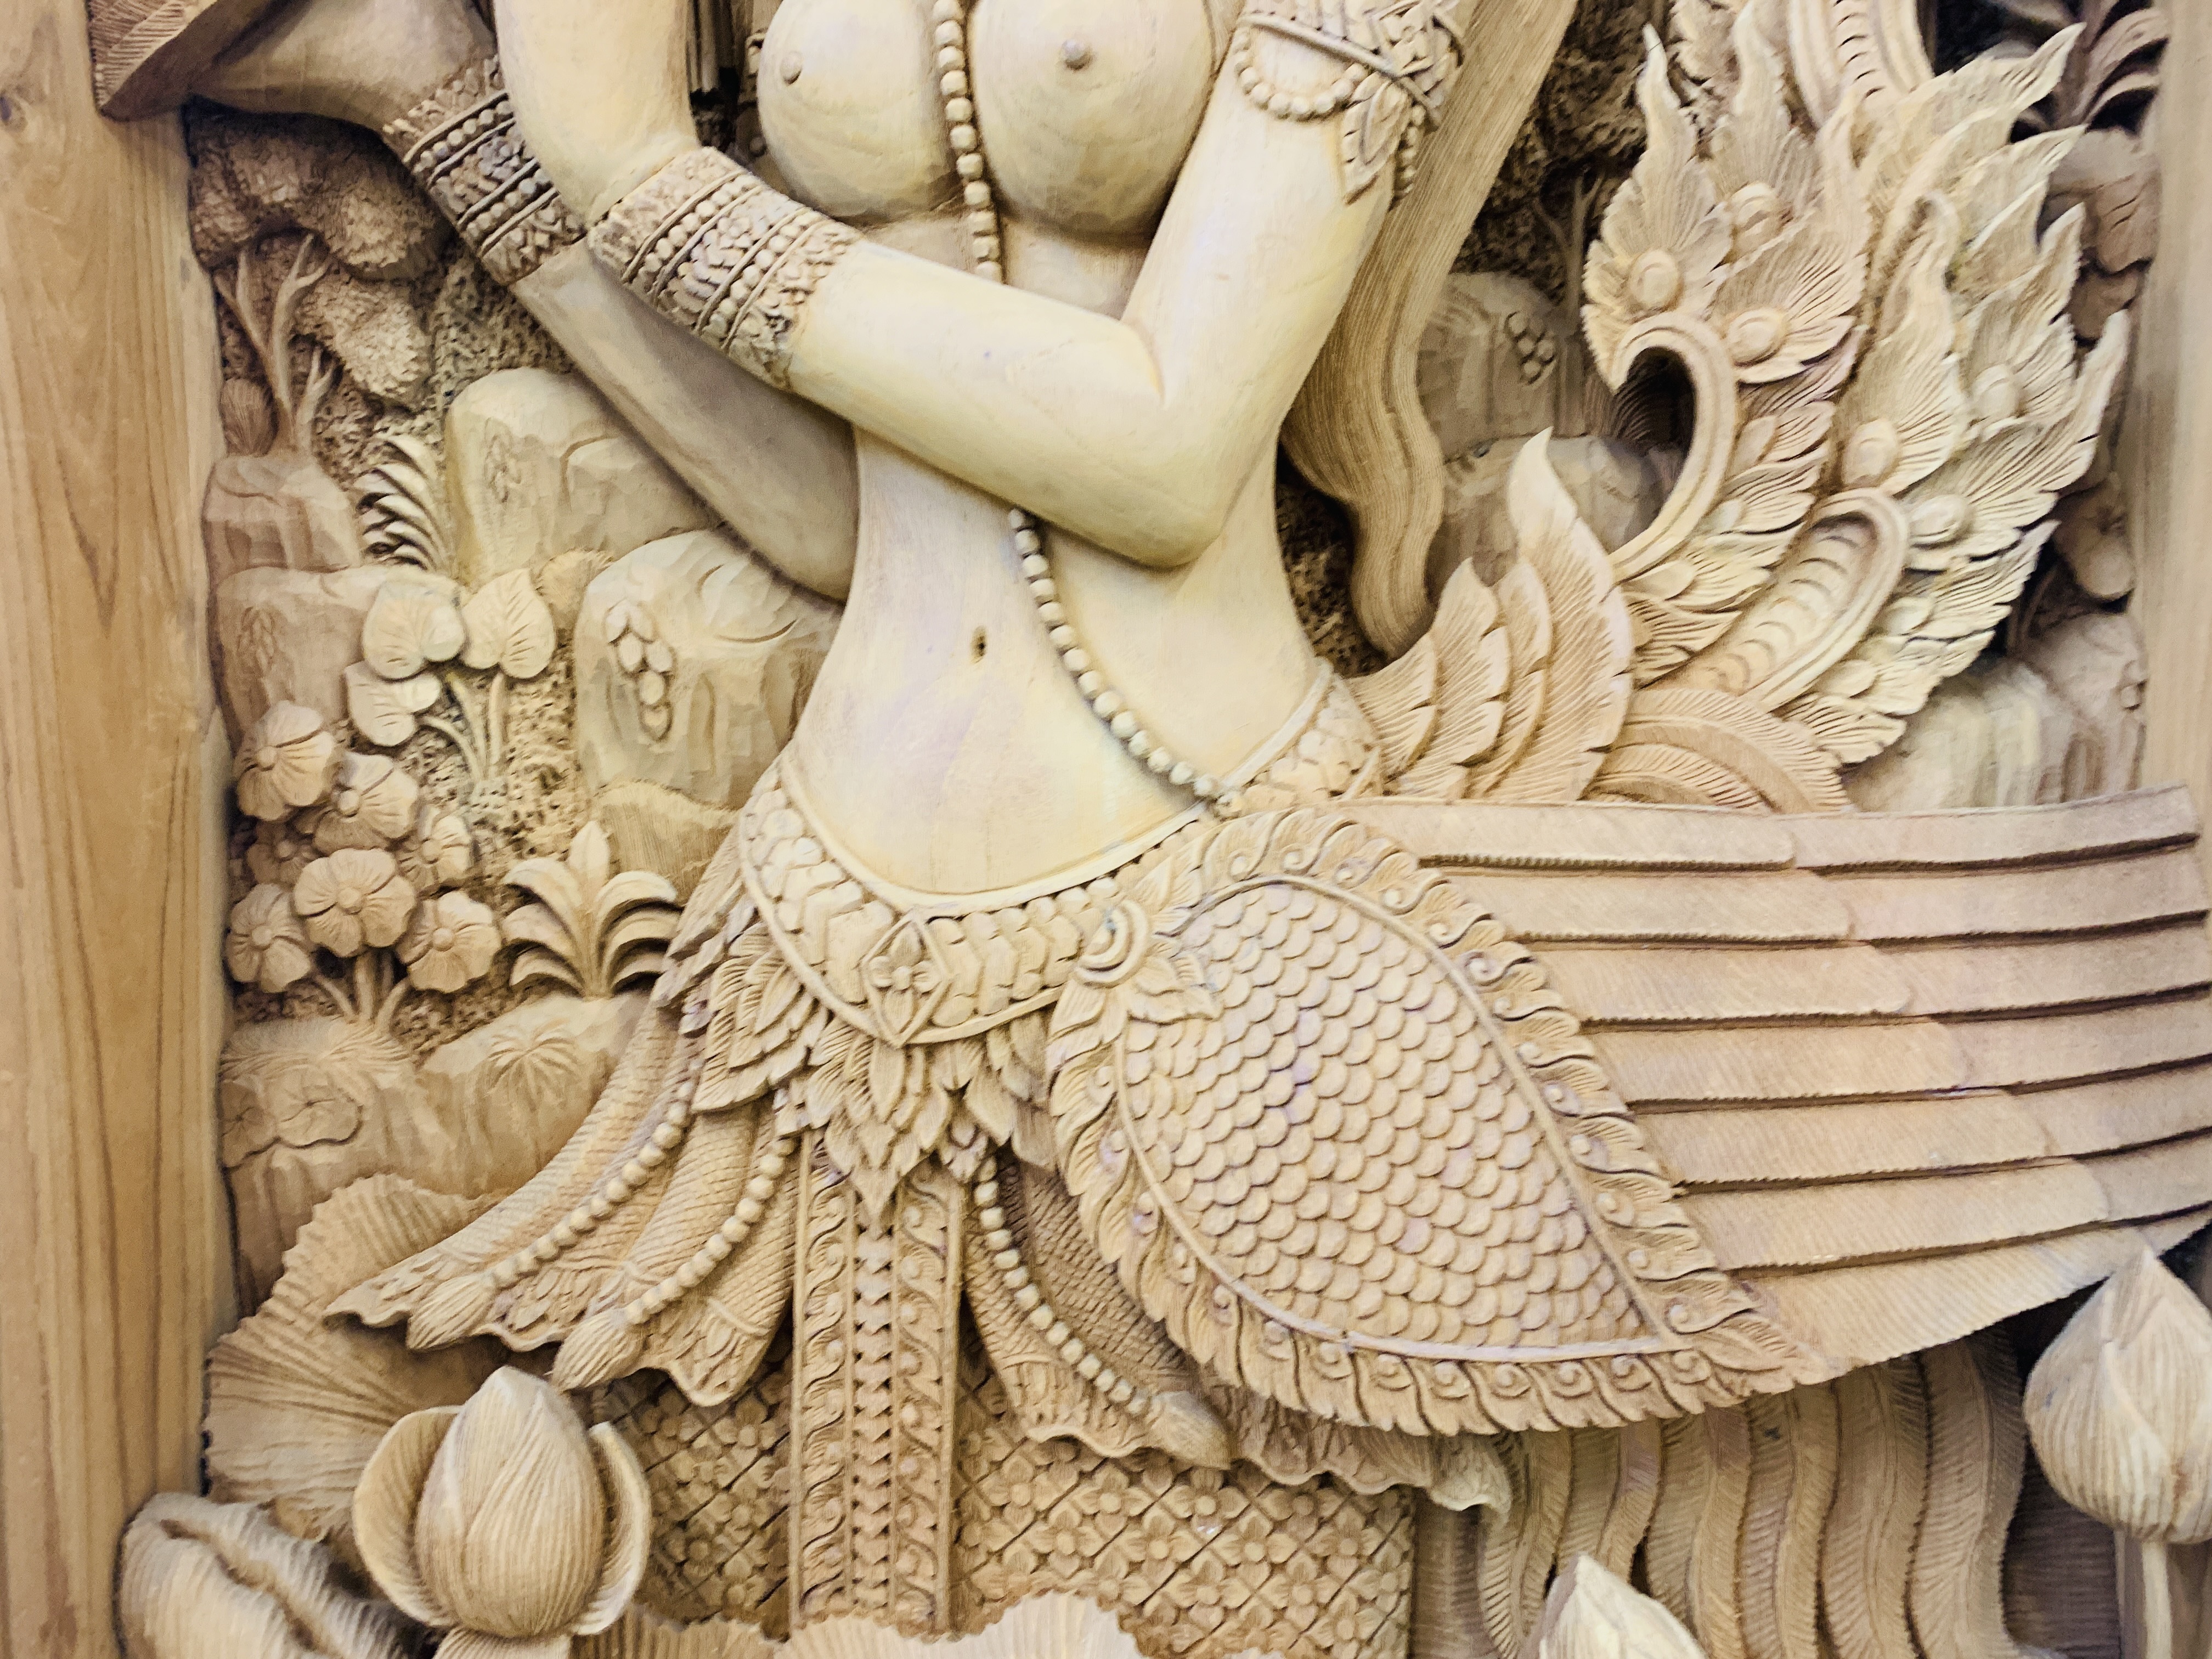 AN IMPRESSIVE ASIAN HAND CARVED TEAK THREE DIMENSIONAL PANEL OF GIRL WITH BIRDS AND FOLIAGE - - Image 6 of 10